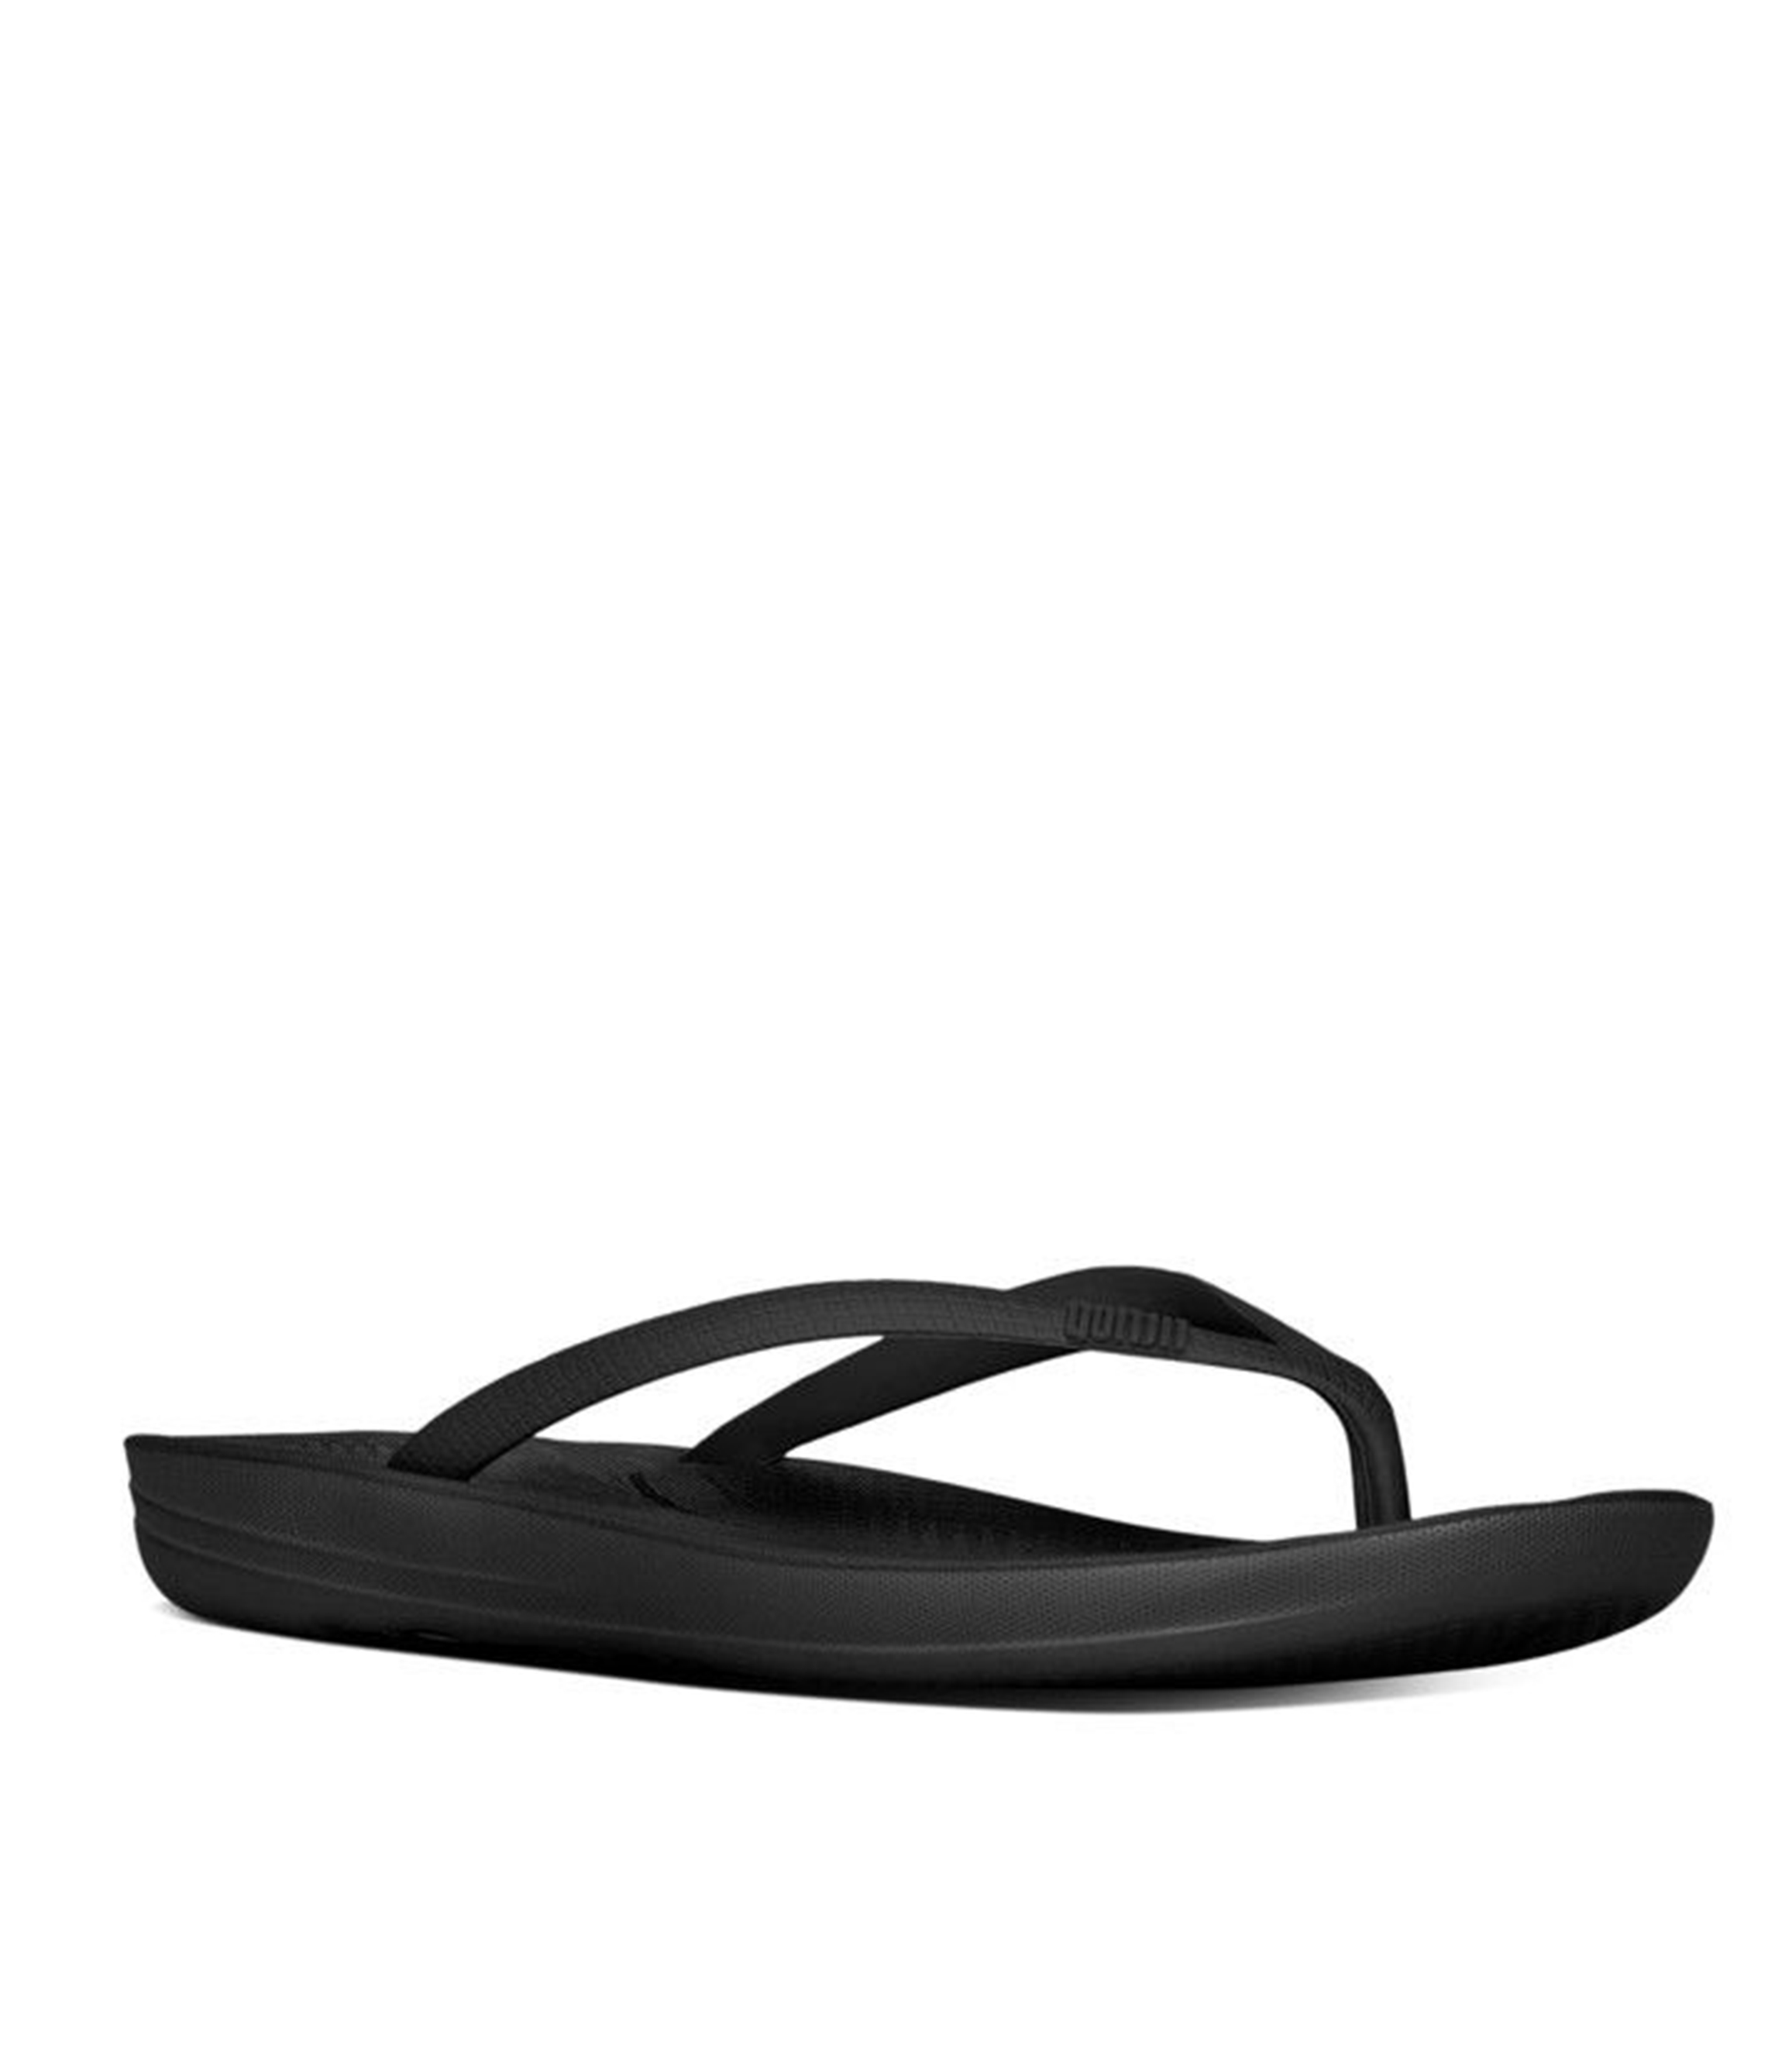 FIT FLOP BLACK IQUSHION ERGONOMIC FLIP-FLOP | Rosella - Style inspired ...